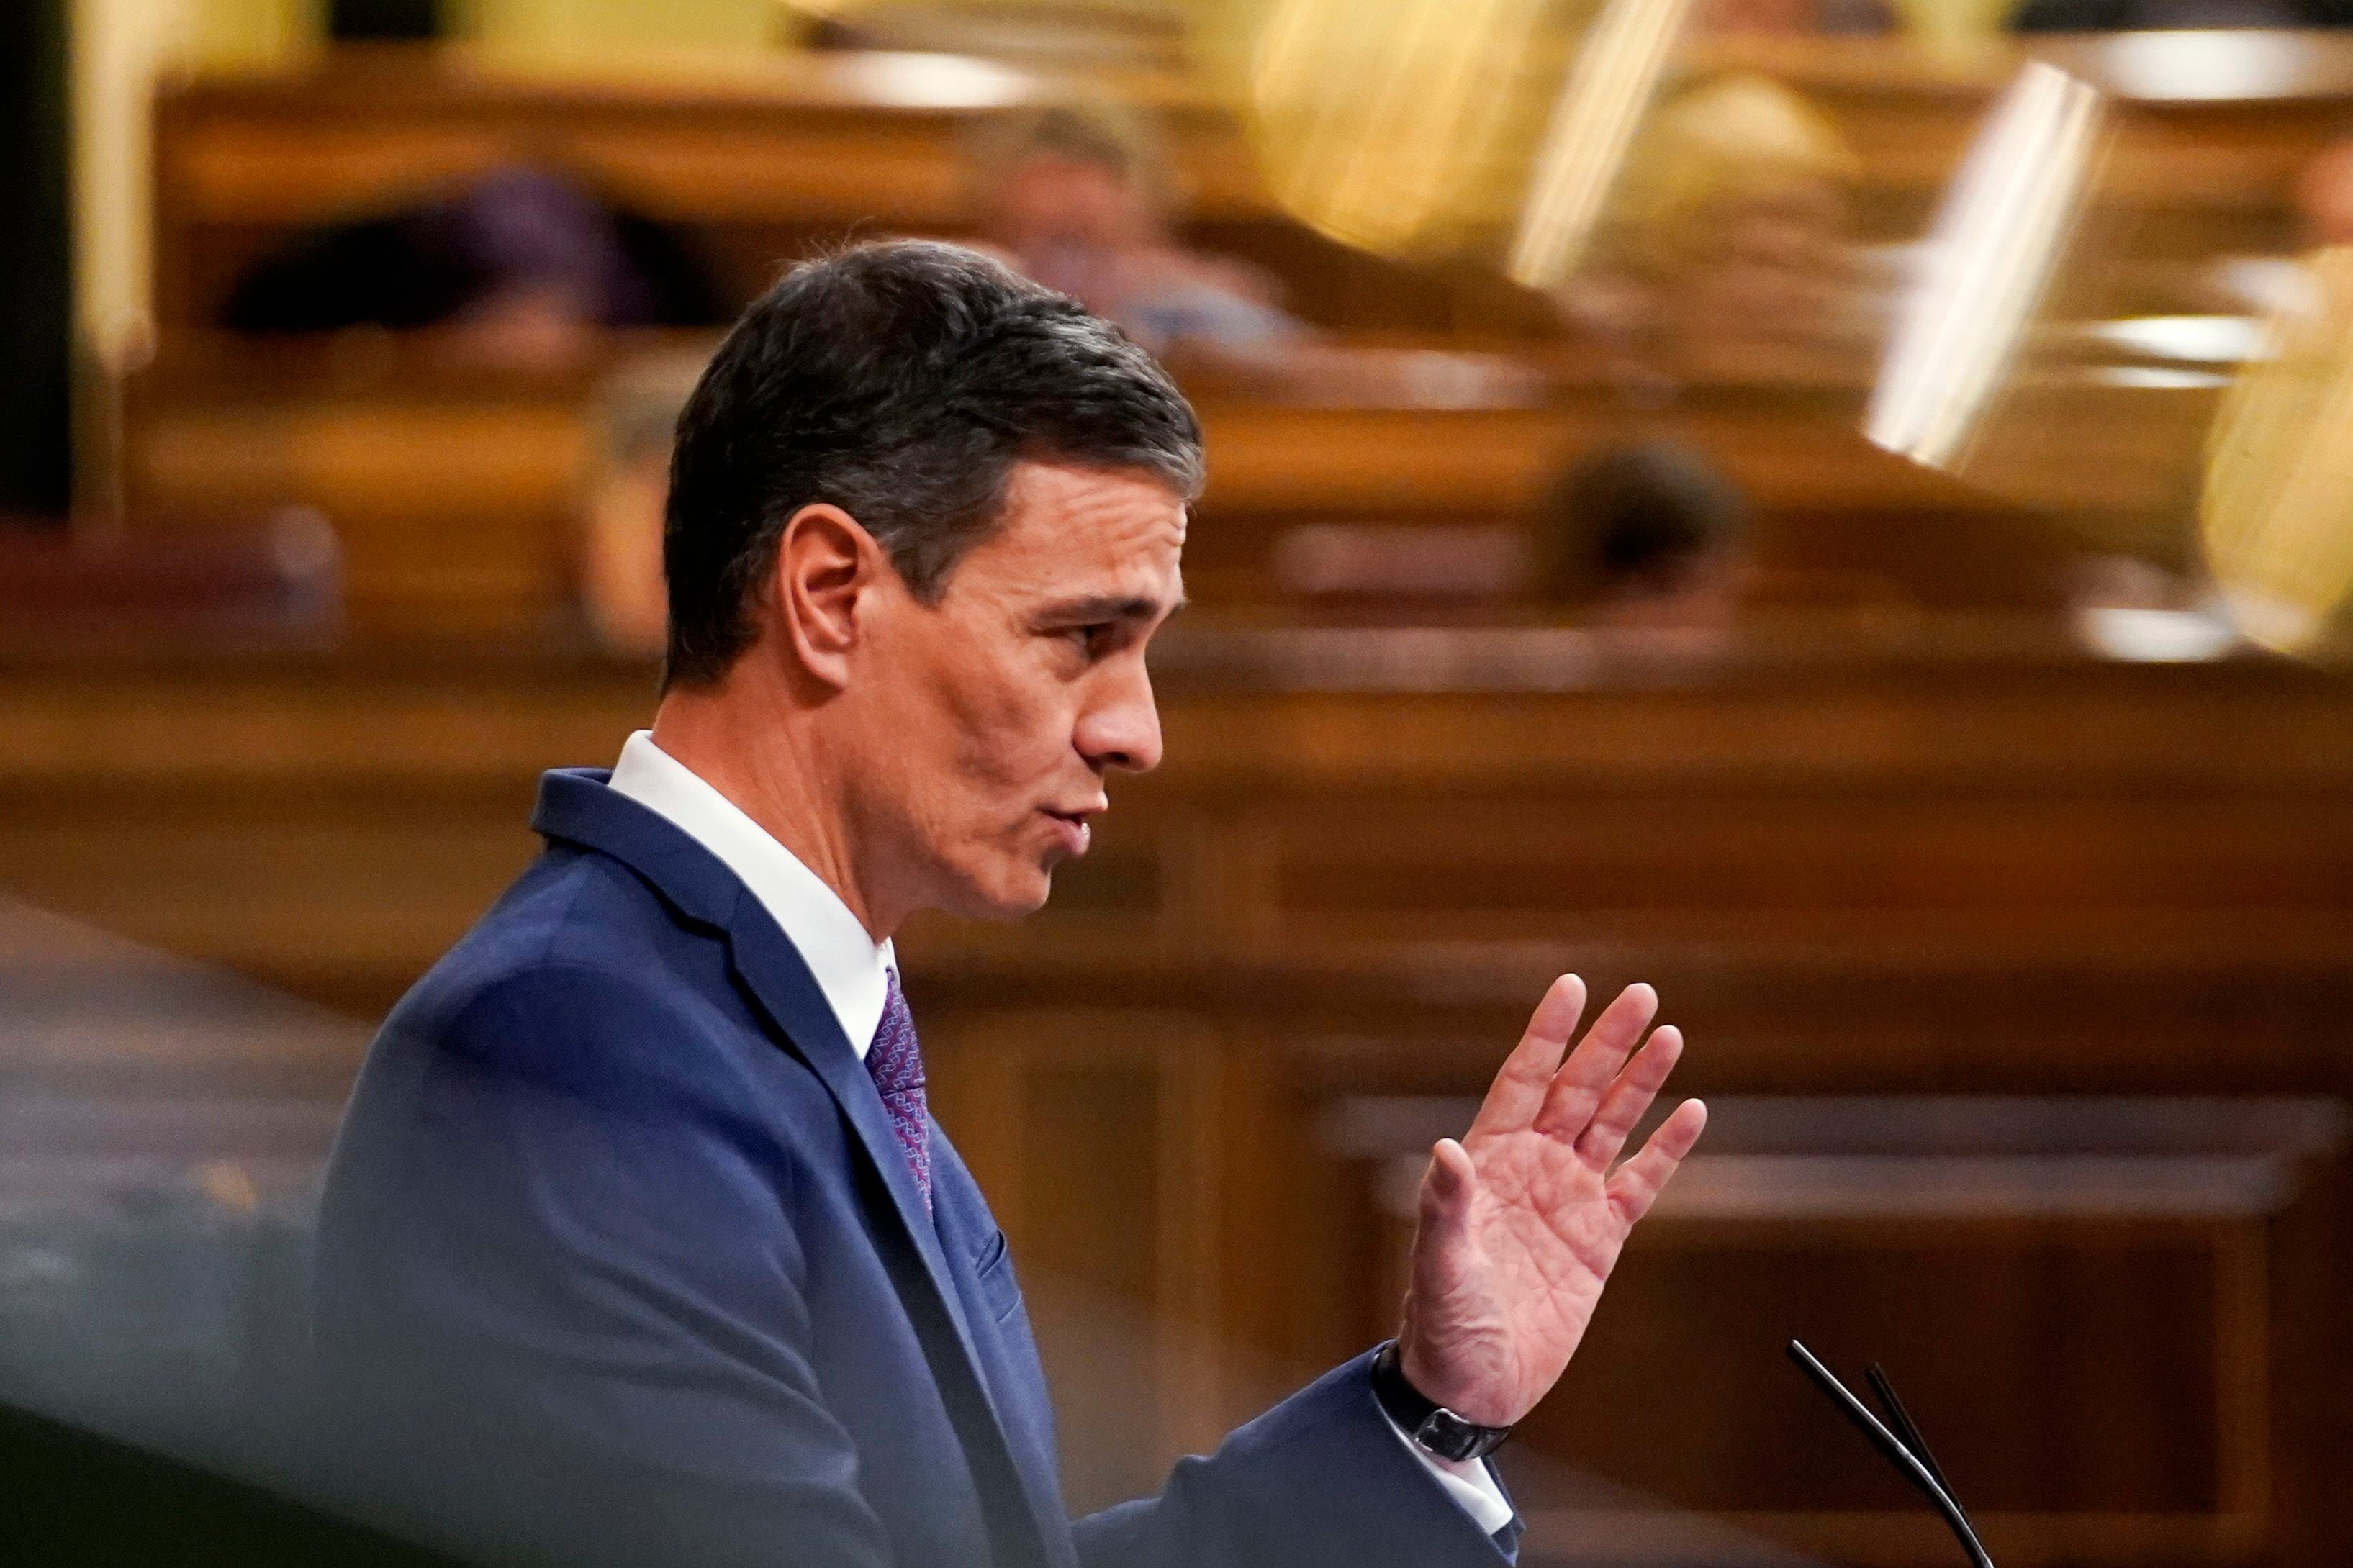 Spanish Prime Minister Pedro Snchez, clean-shaven as usual, addressing lawmakers in Congress last month. 